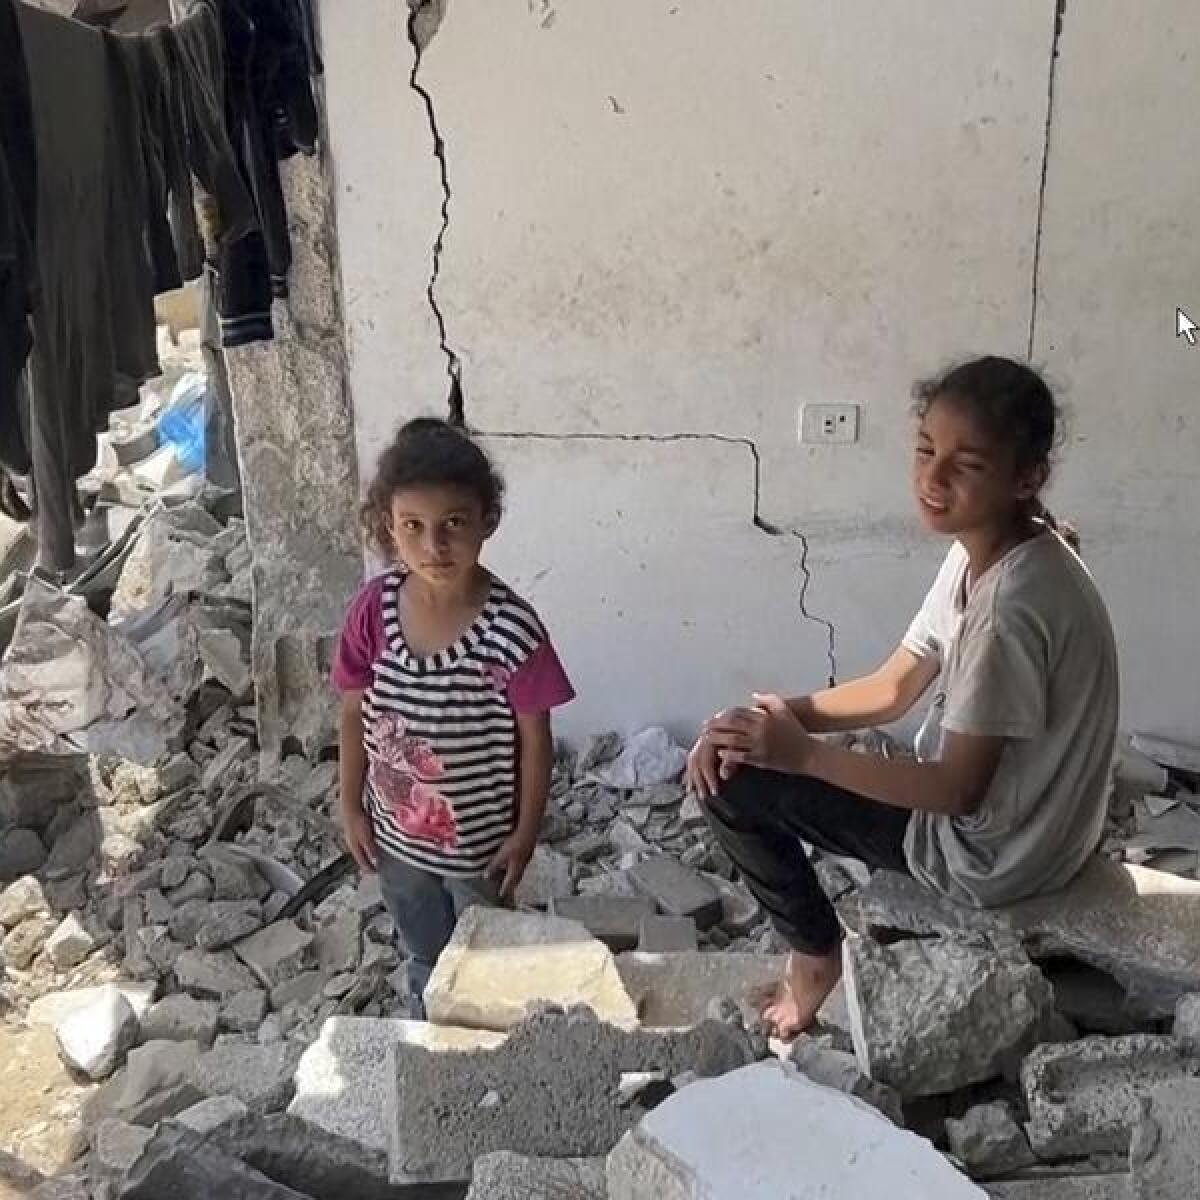 Children in a bombed out building